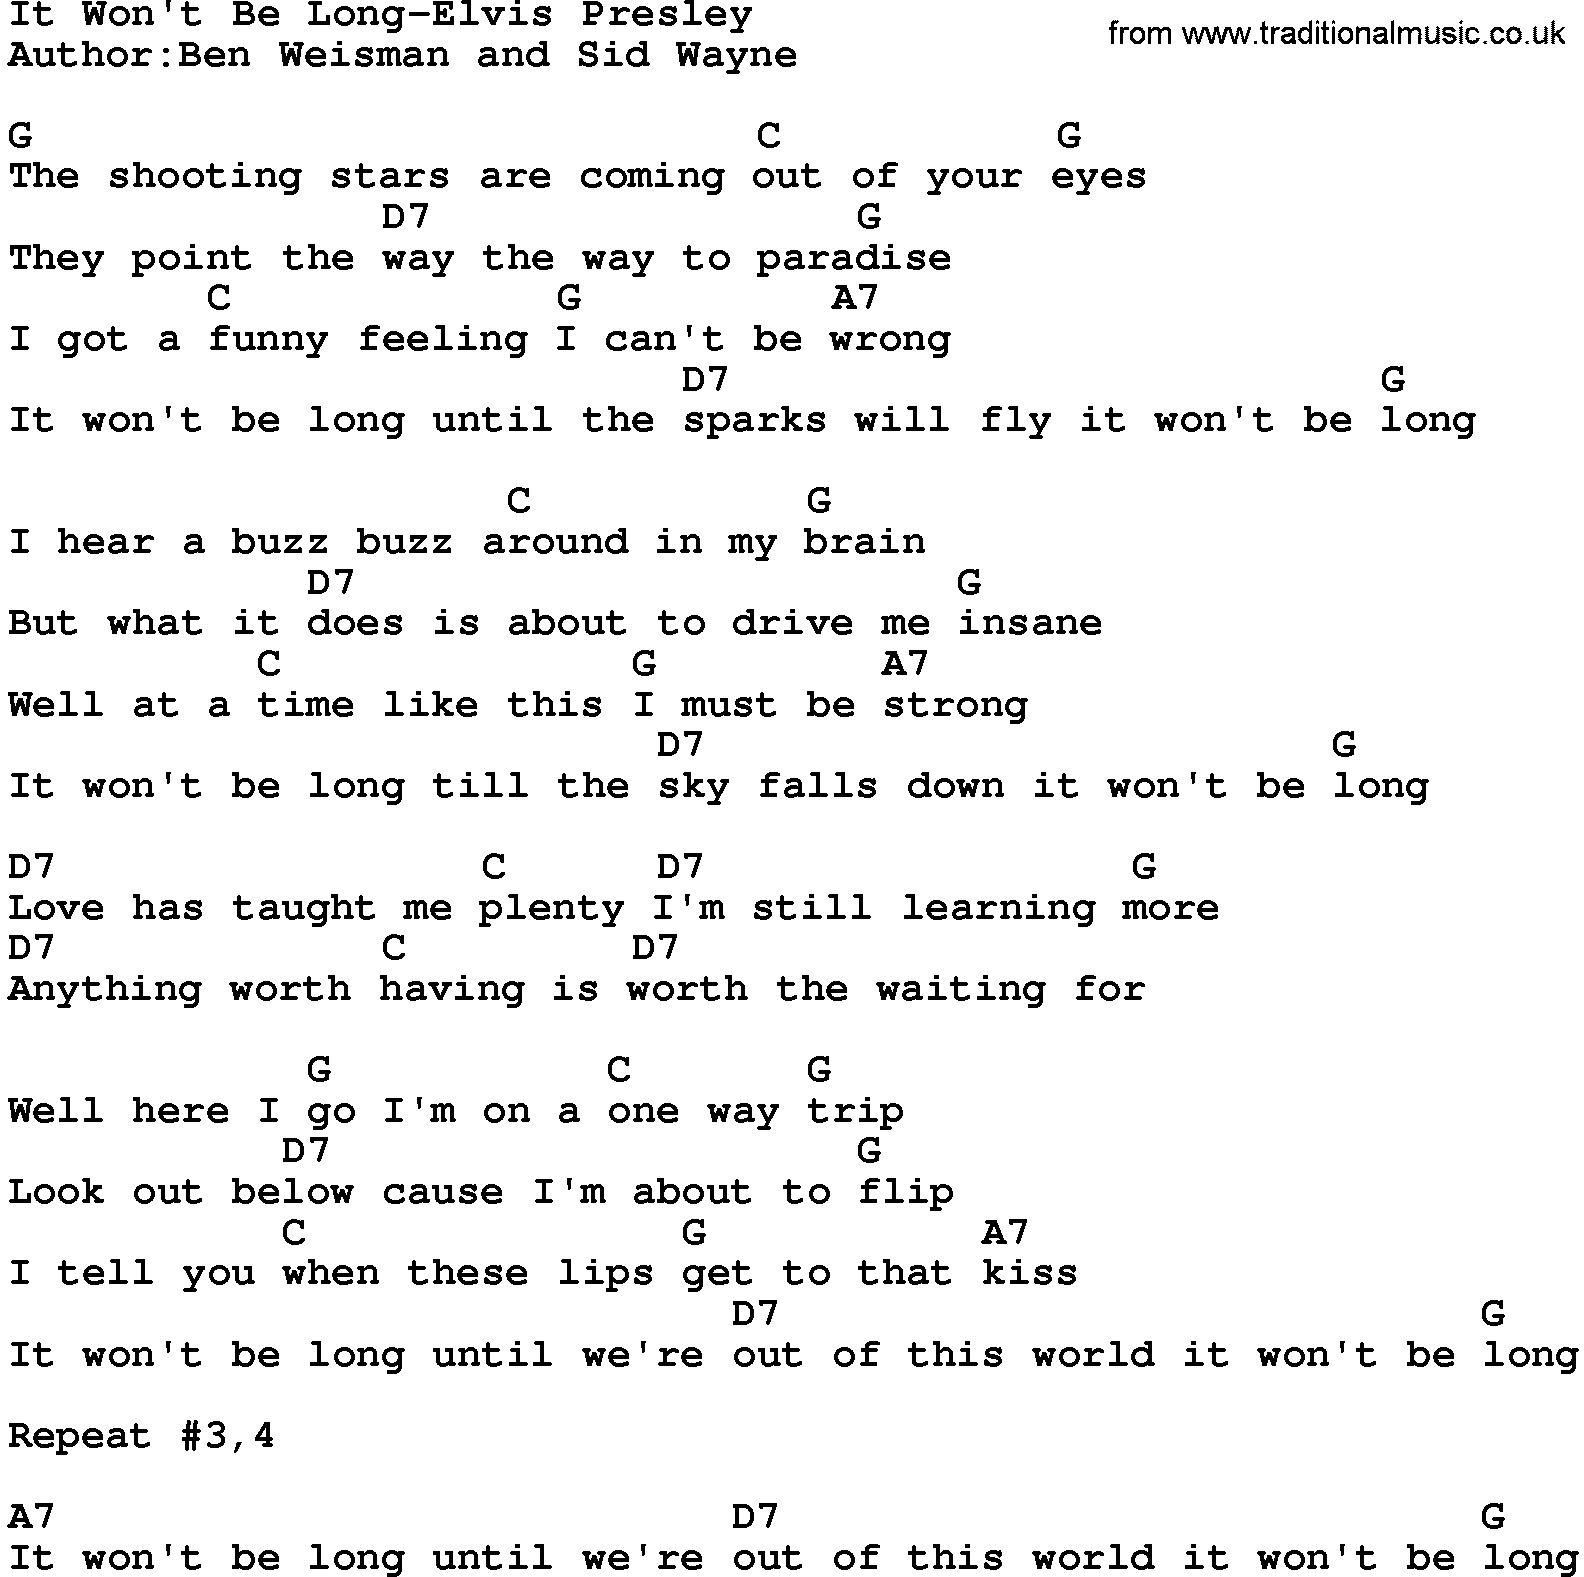 Country music song: It Won't Be Long-Elvis Presley lyrics and chords